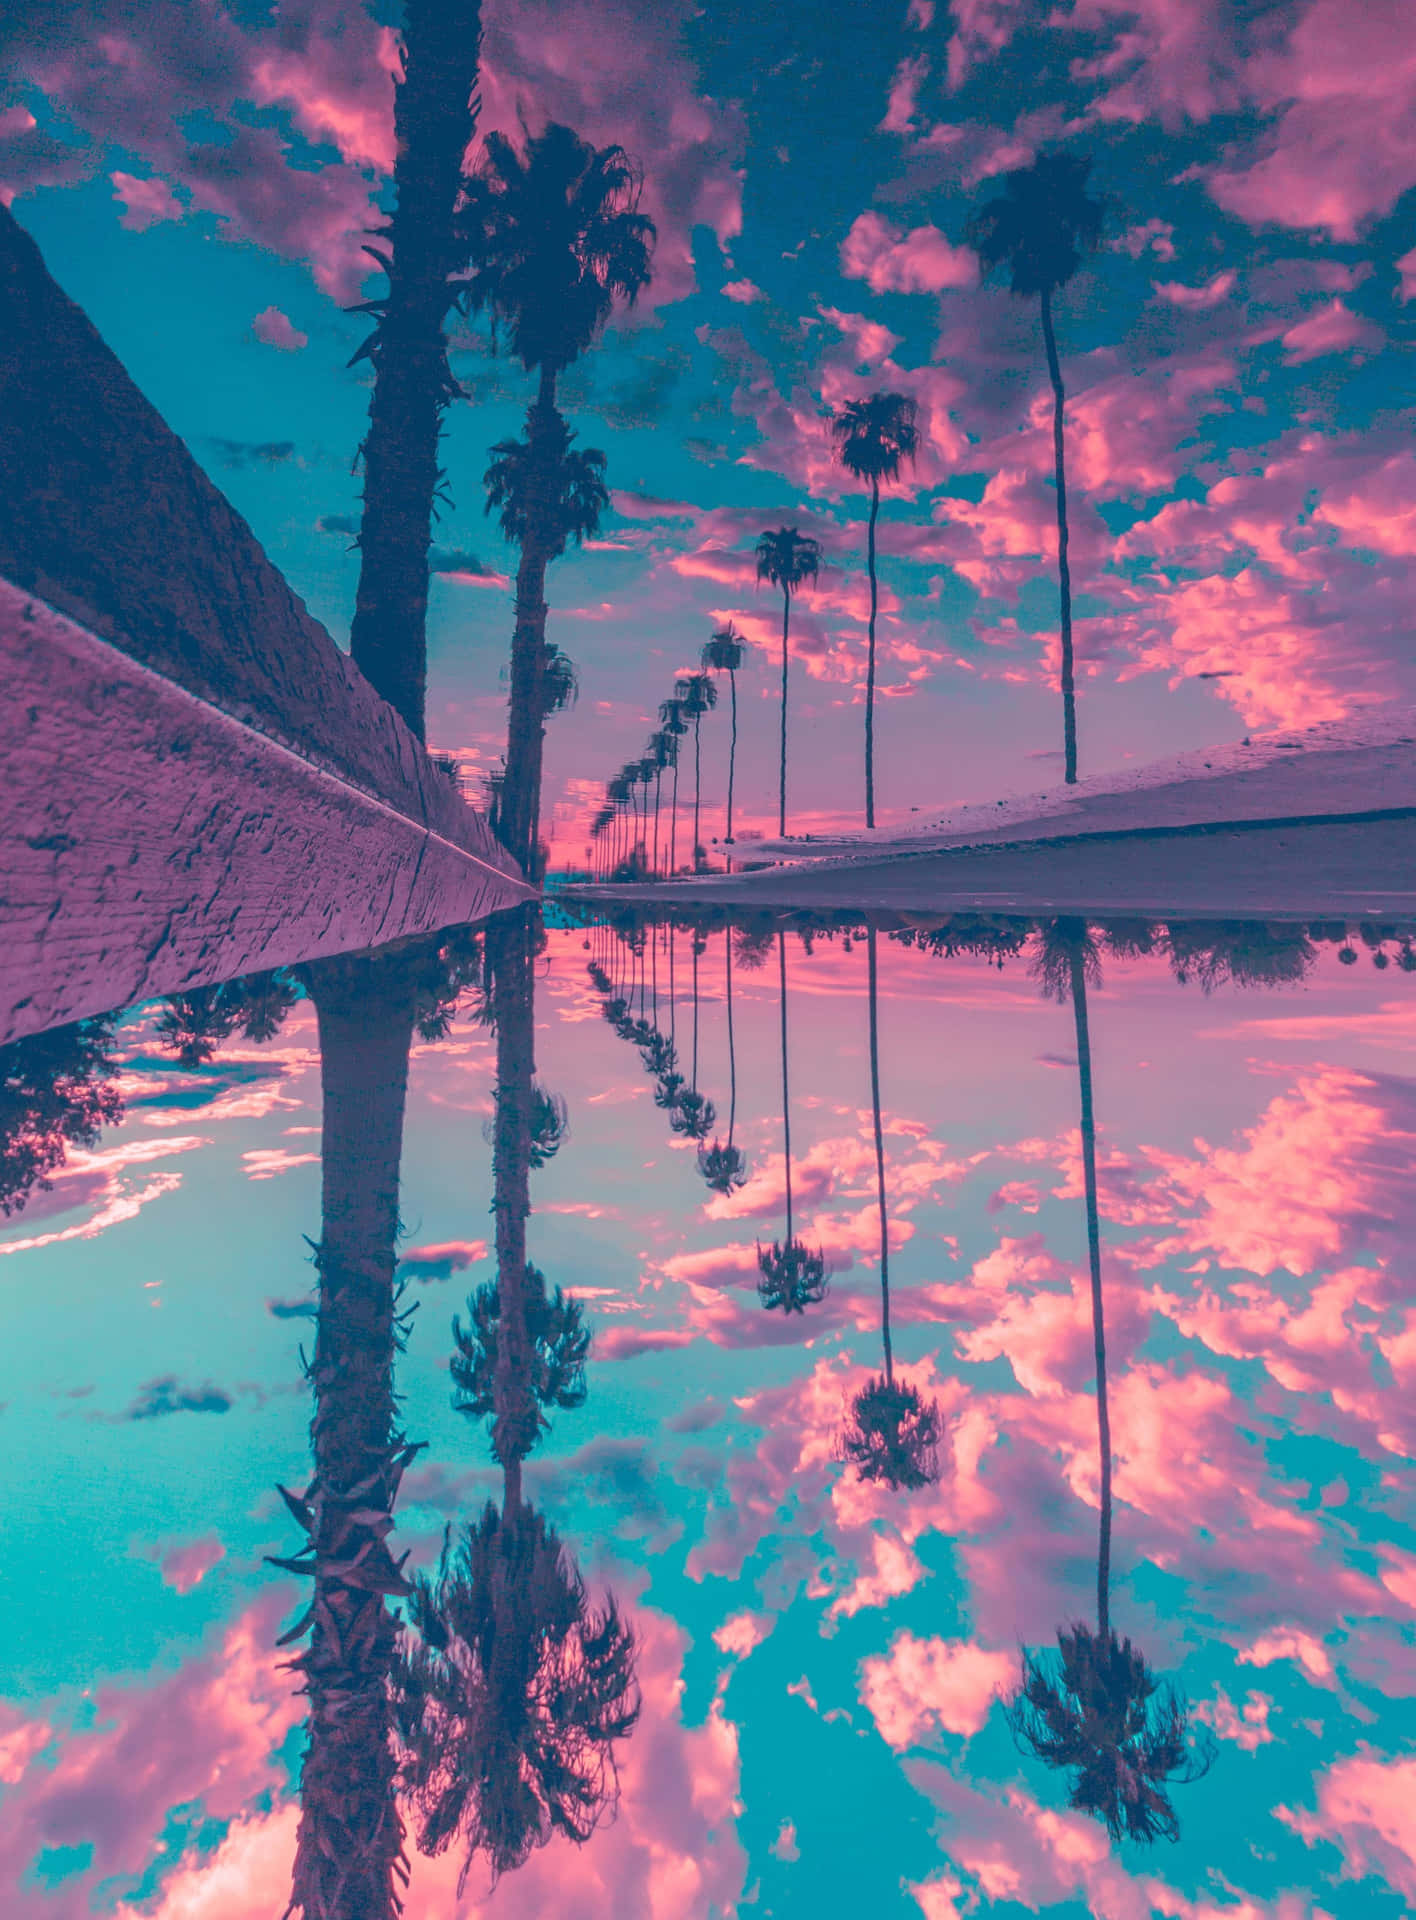 Aesthetic Background With Pink Clouds And Palm Trees